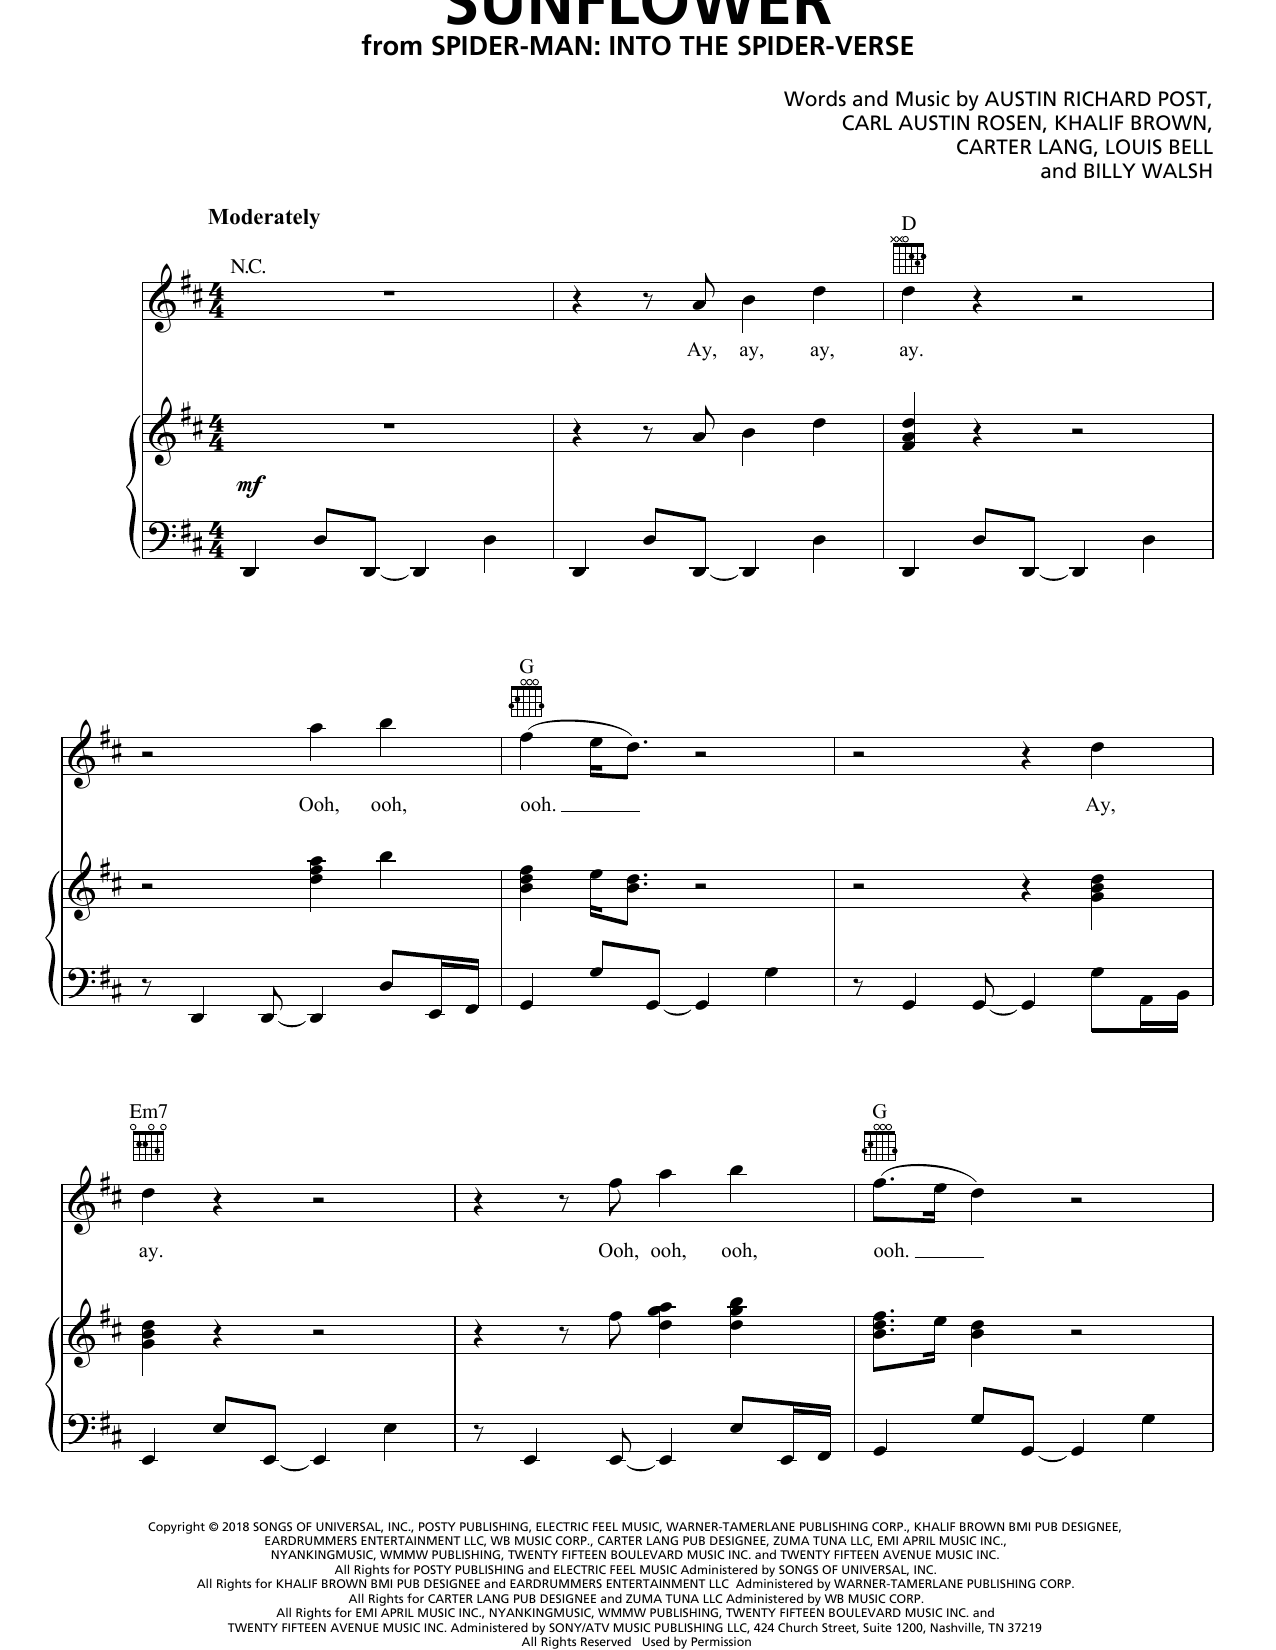 Download Post Malone & Swae Lee Sunflower (from Spider-Man: Into The Sp Sheet Music